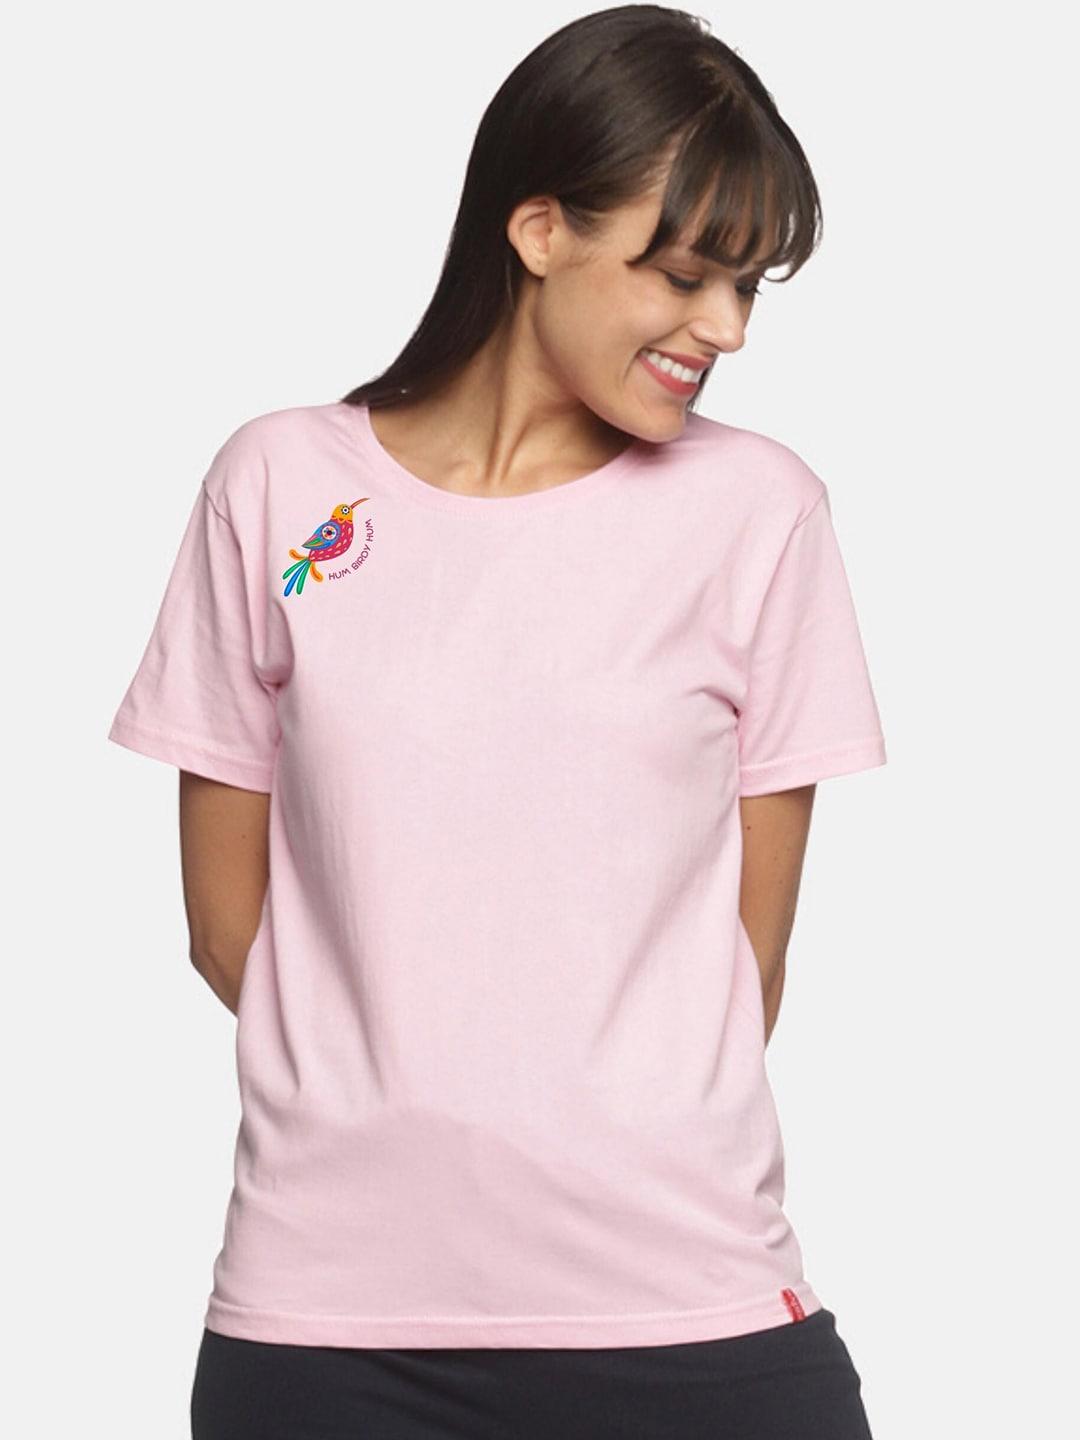 NOT YET by us Women Pink Solid Cotton Round Neck T-shirts